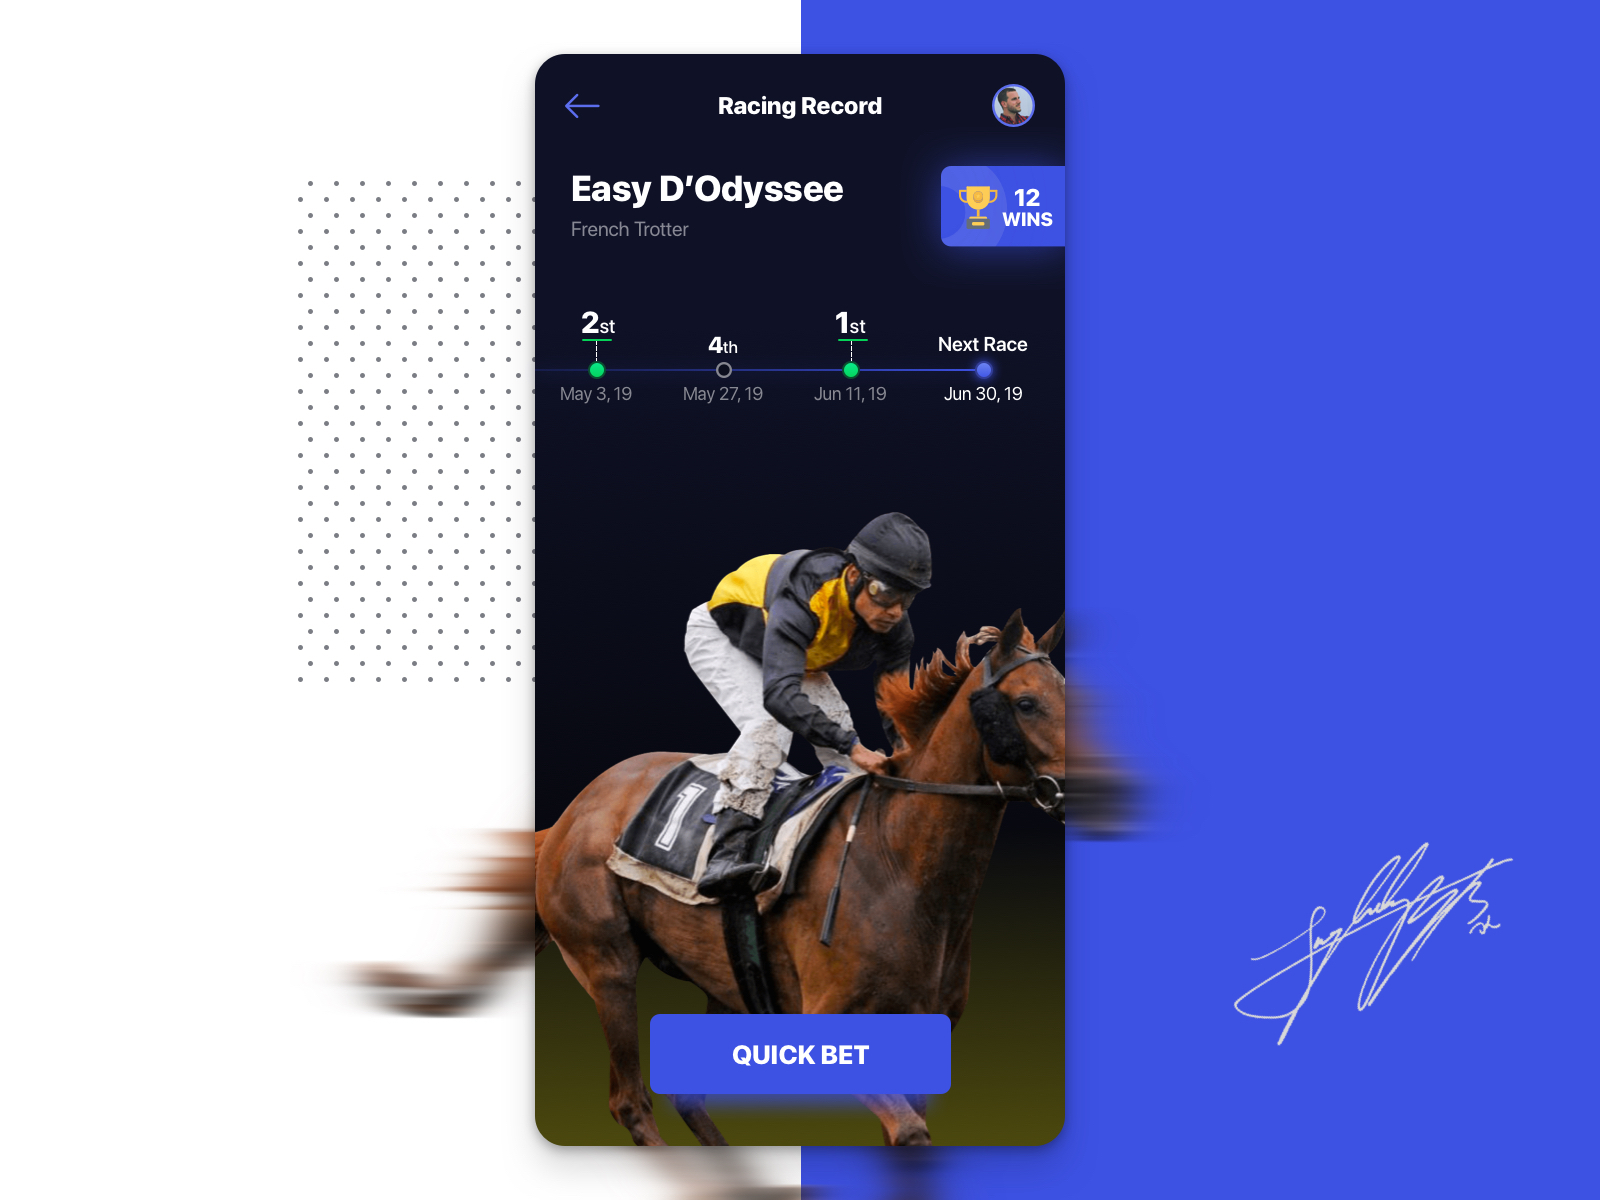 Horse Racing Mobile App - Proof of Concept by Tiago Luís on Dribbble